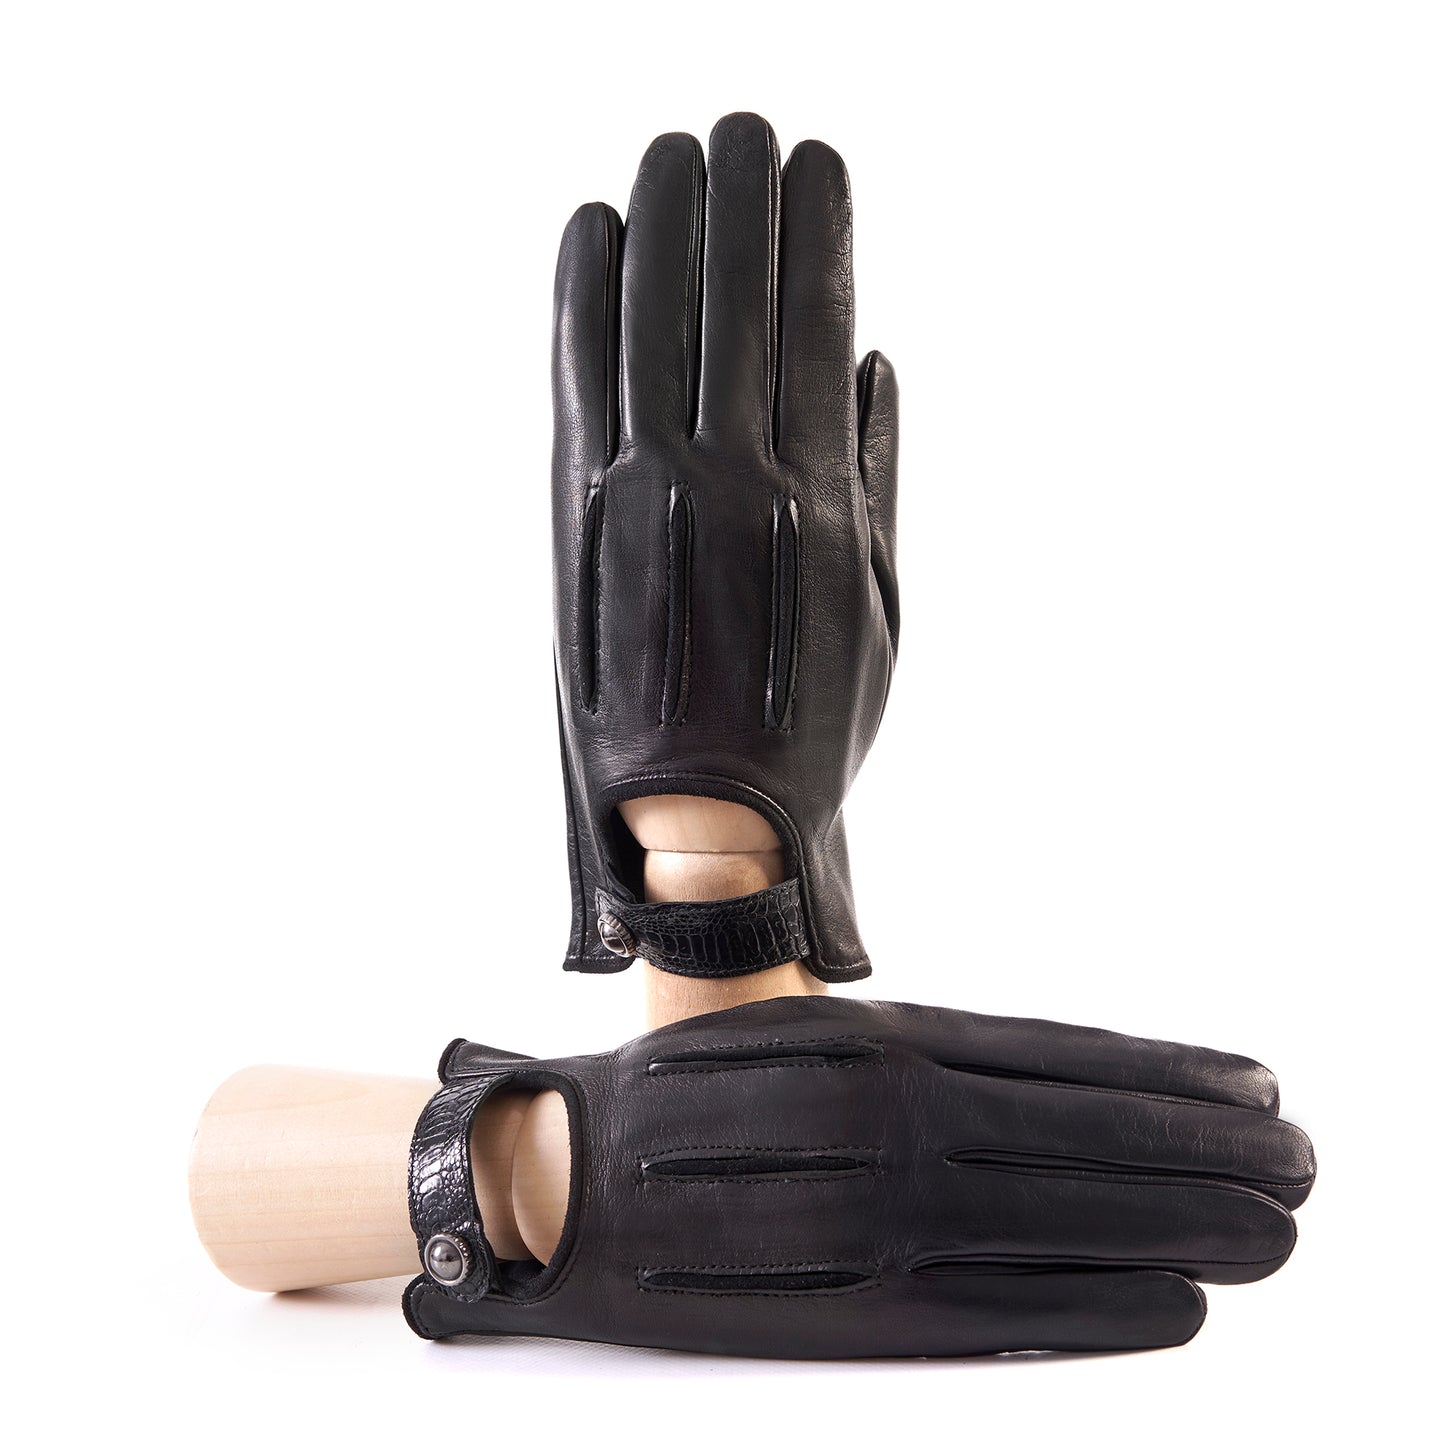 Men's soft black nappa leather gloves with suede details with strap and silk lining